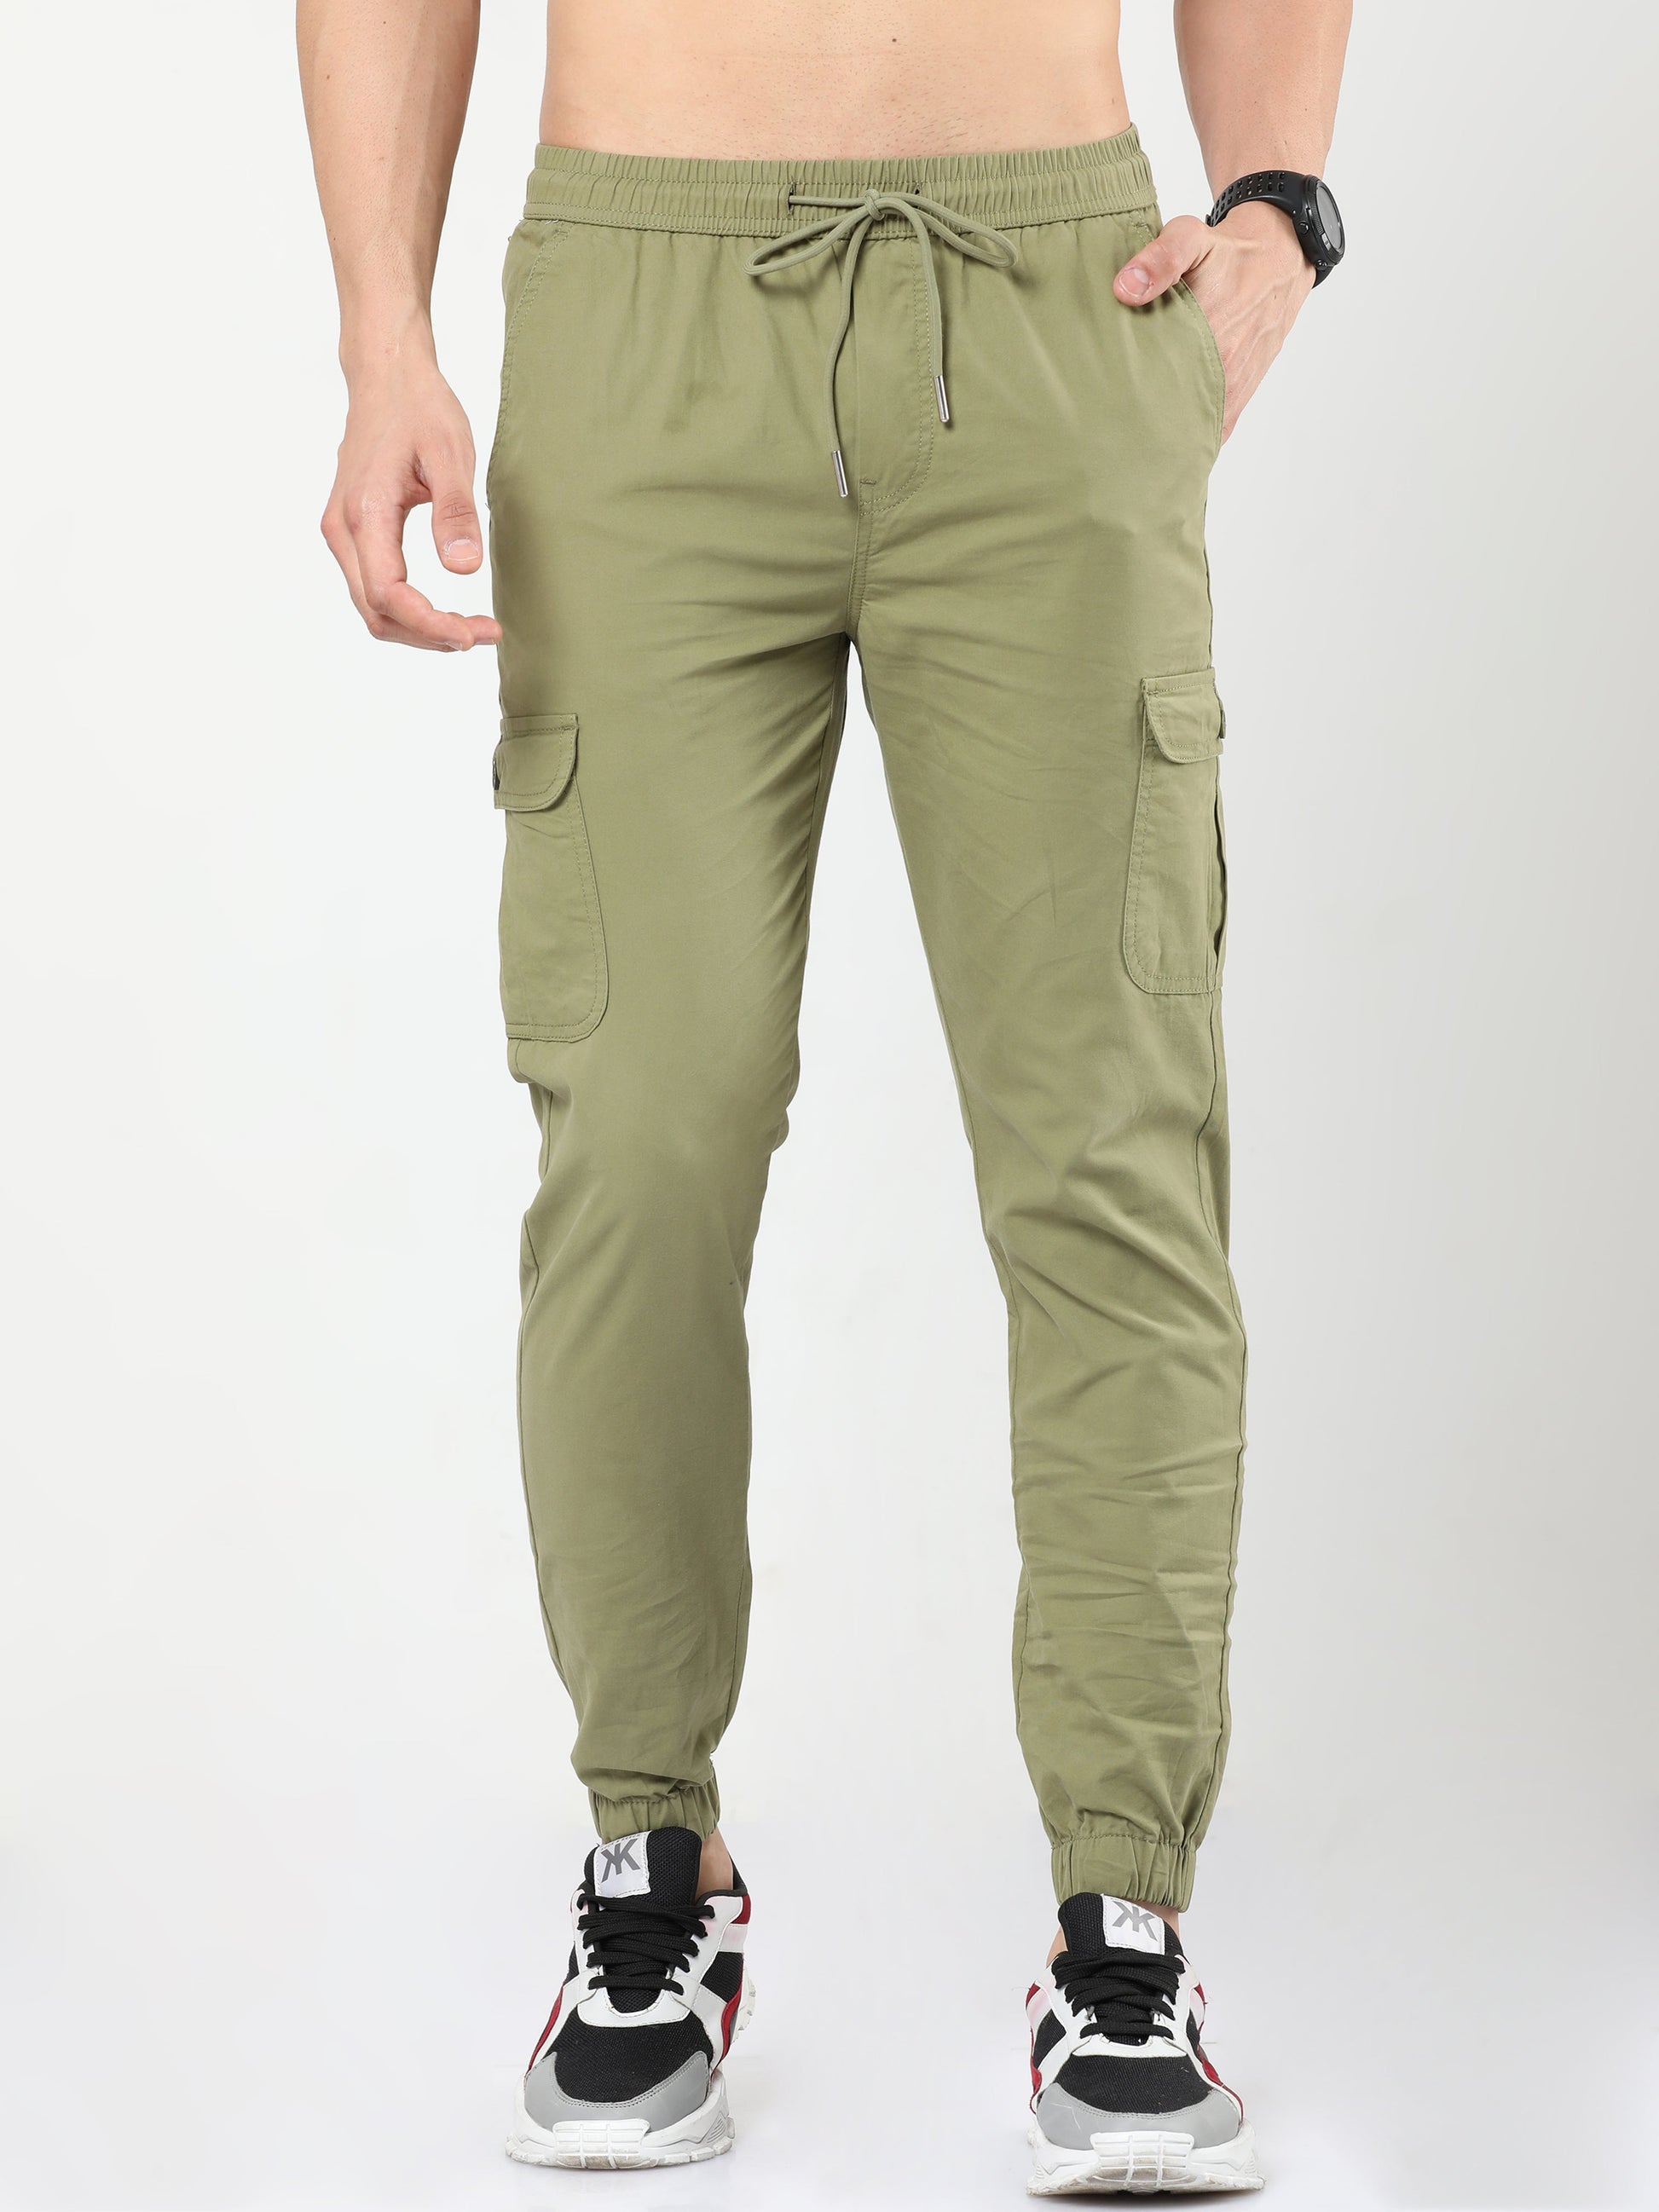 Shop Latest Grey Joggers Men Online In India – DAKS NEO CLOTHING CO.INDIA